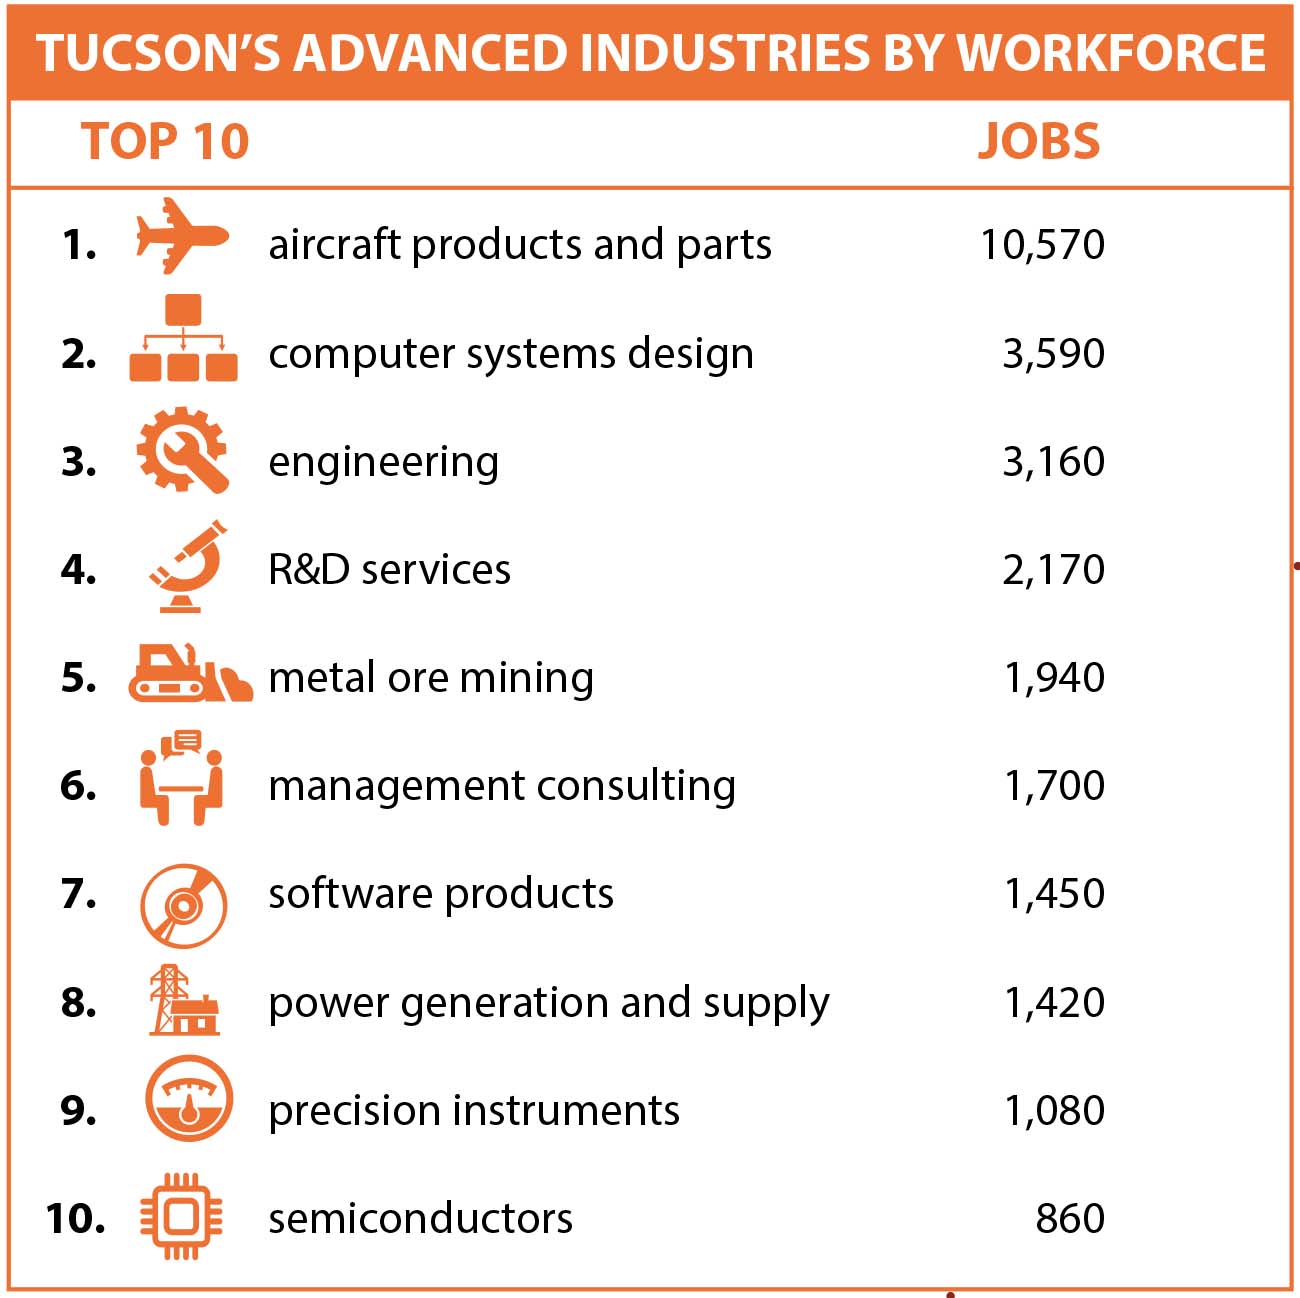 Chart titled “Tucson’s Advanced Industries by Workforce”